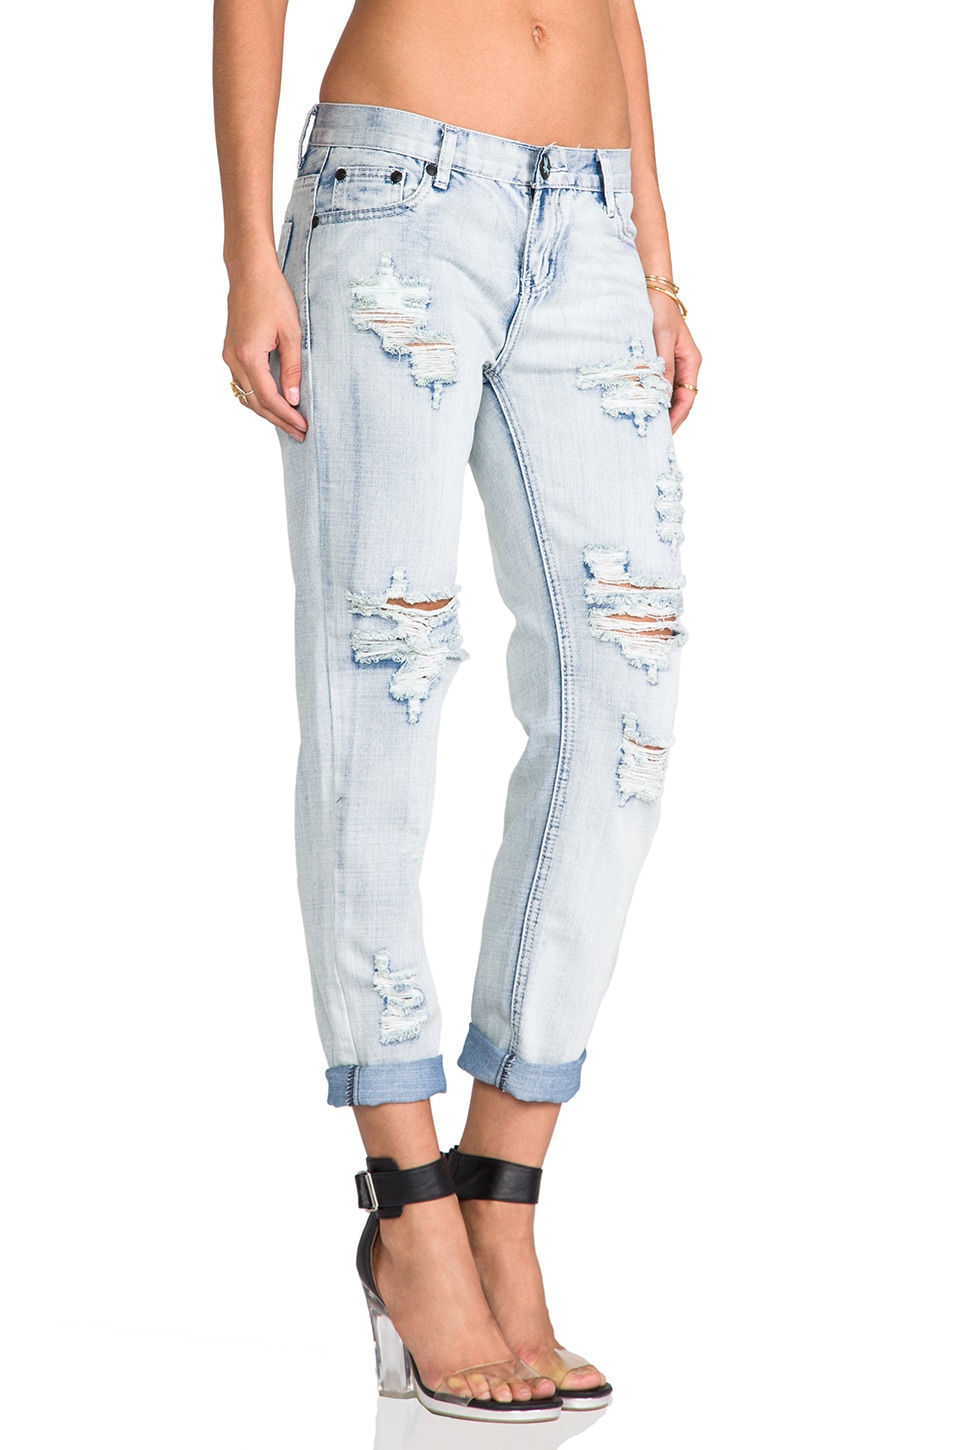 One Teaspoon Awesome Baggies Jeans in Fiasco | REVOLVE